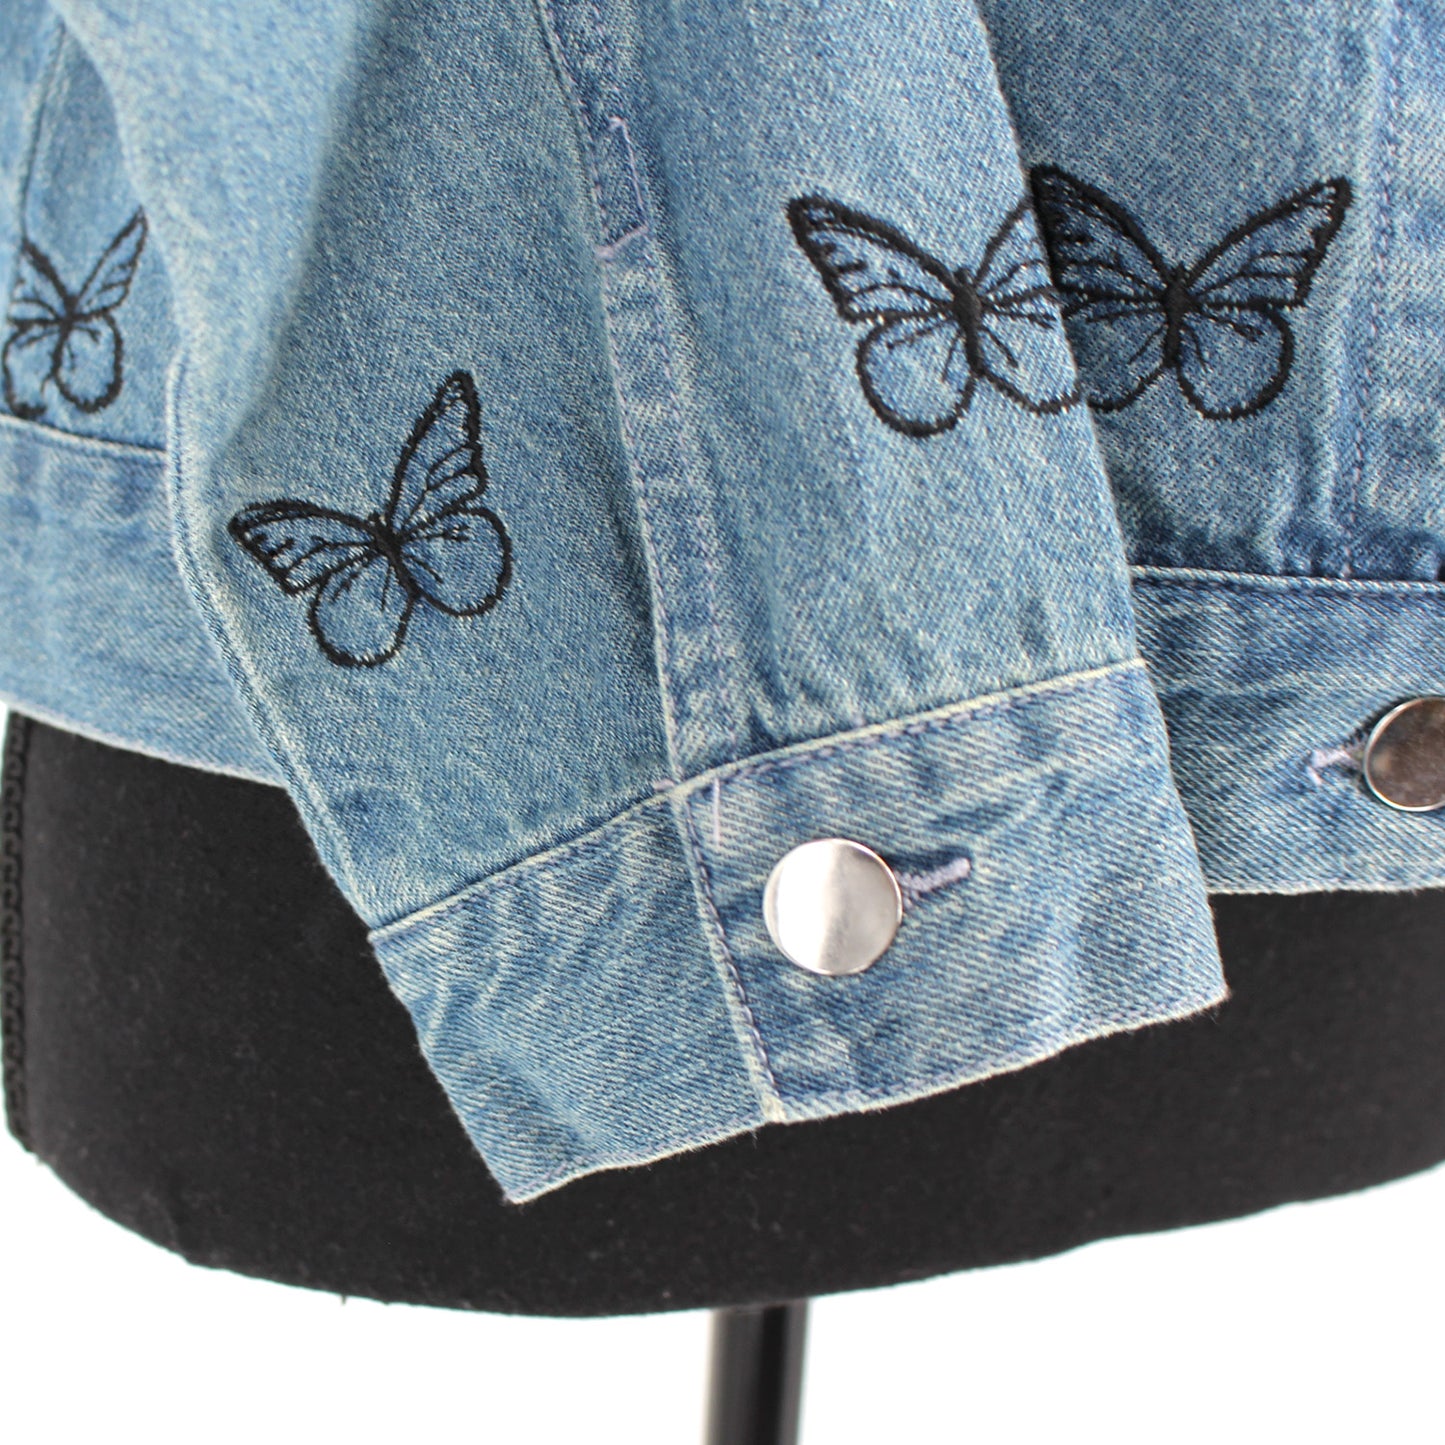 Samantha Sipos Butterfly Jacket